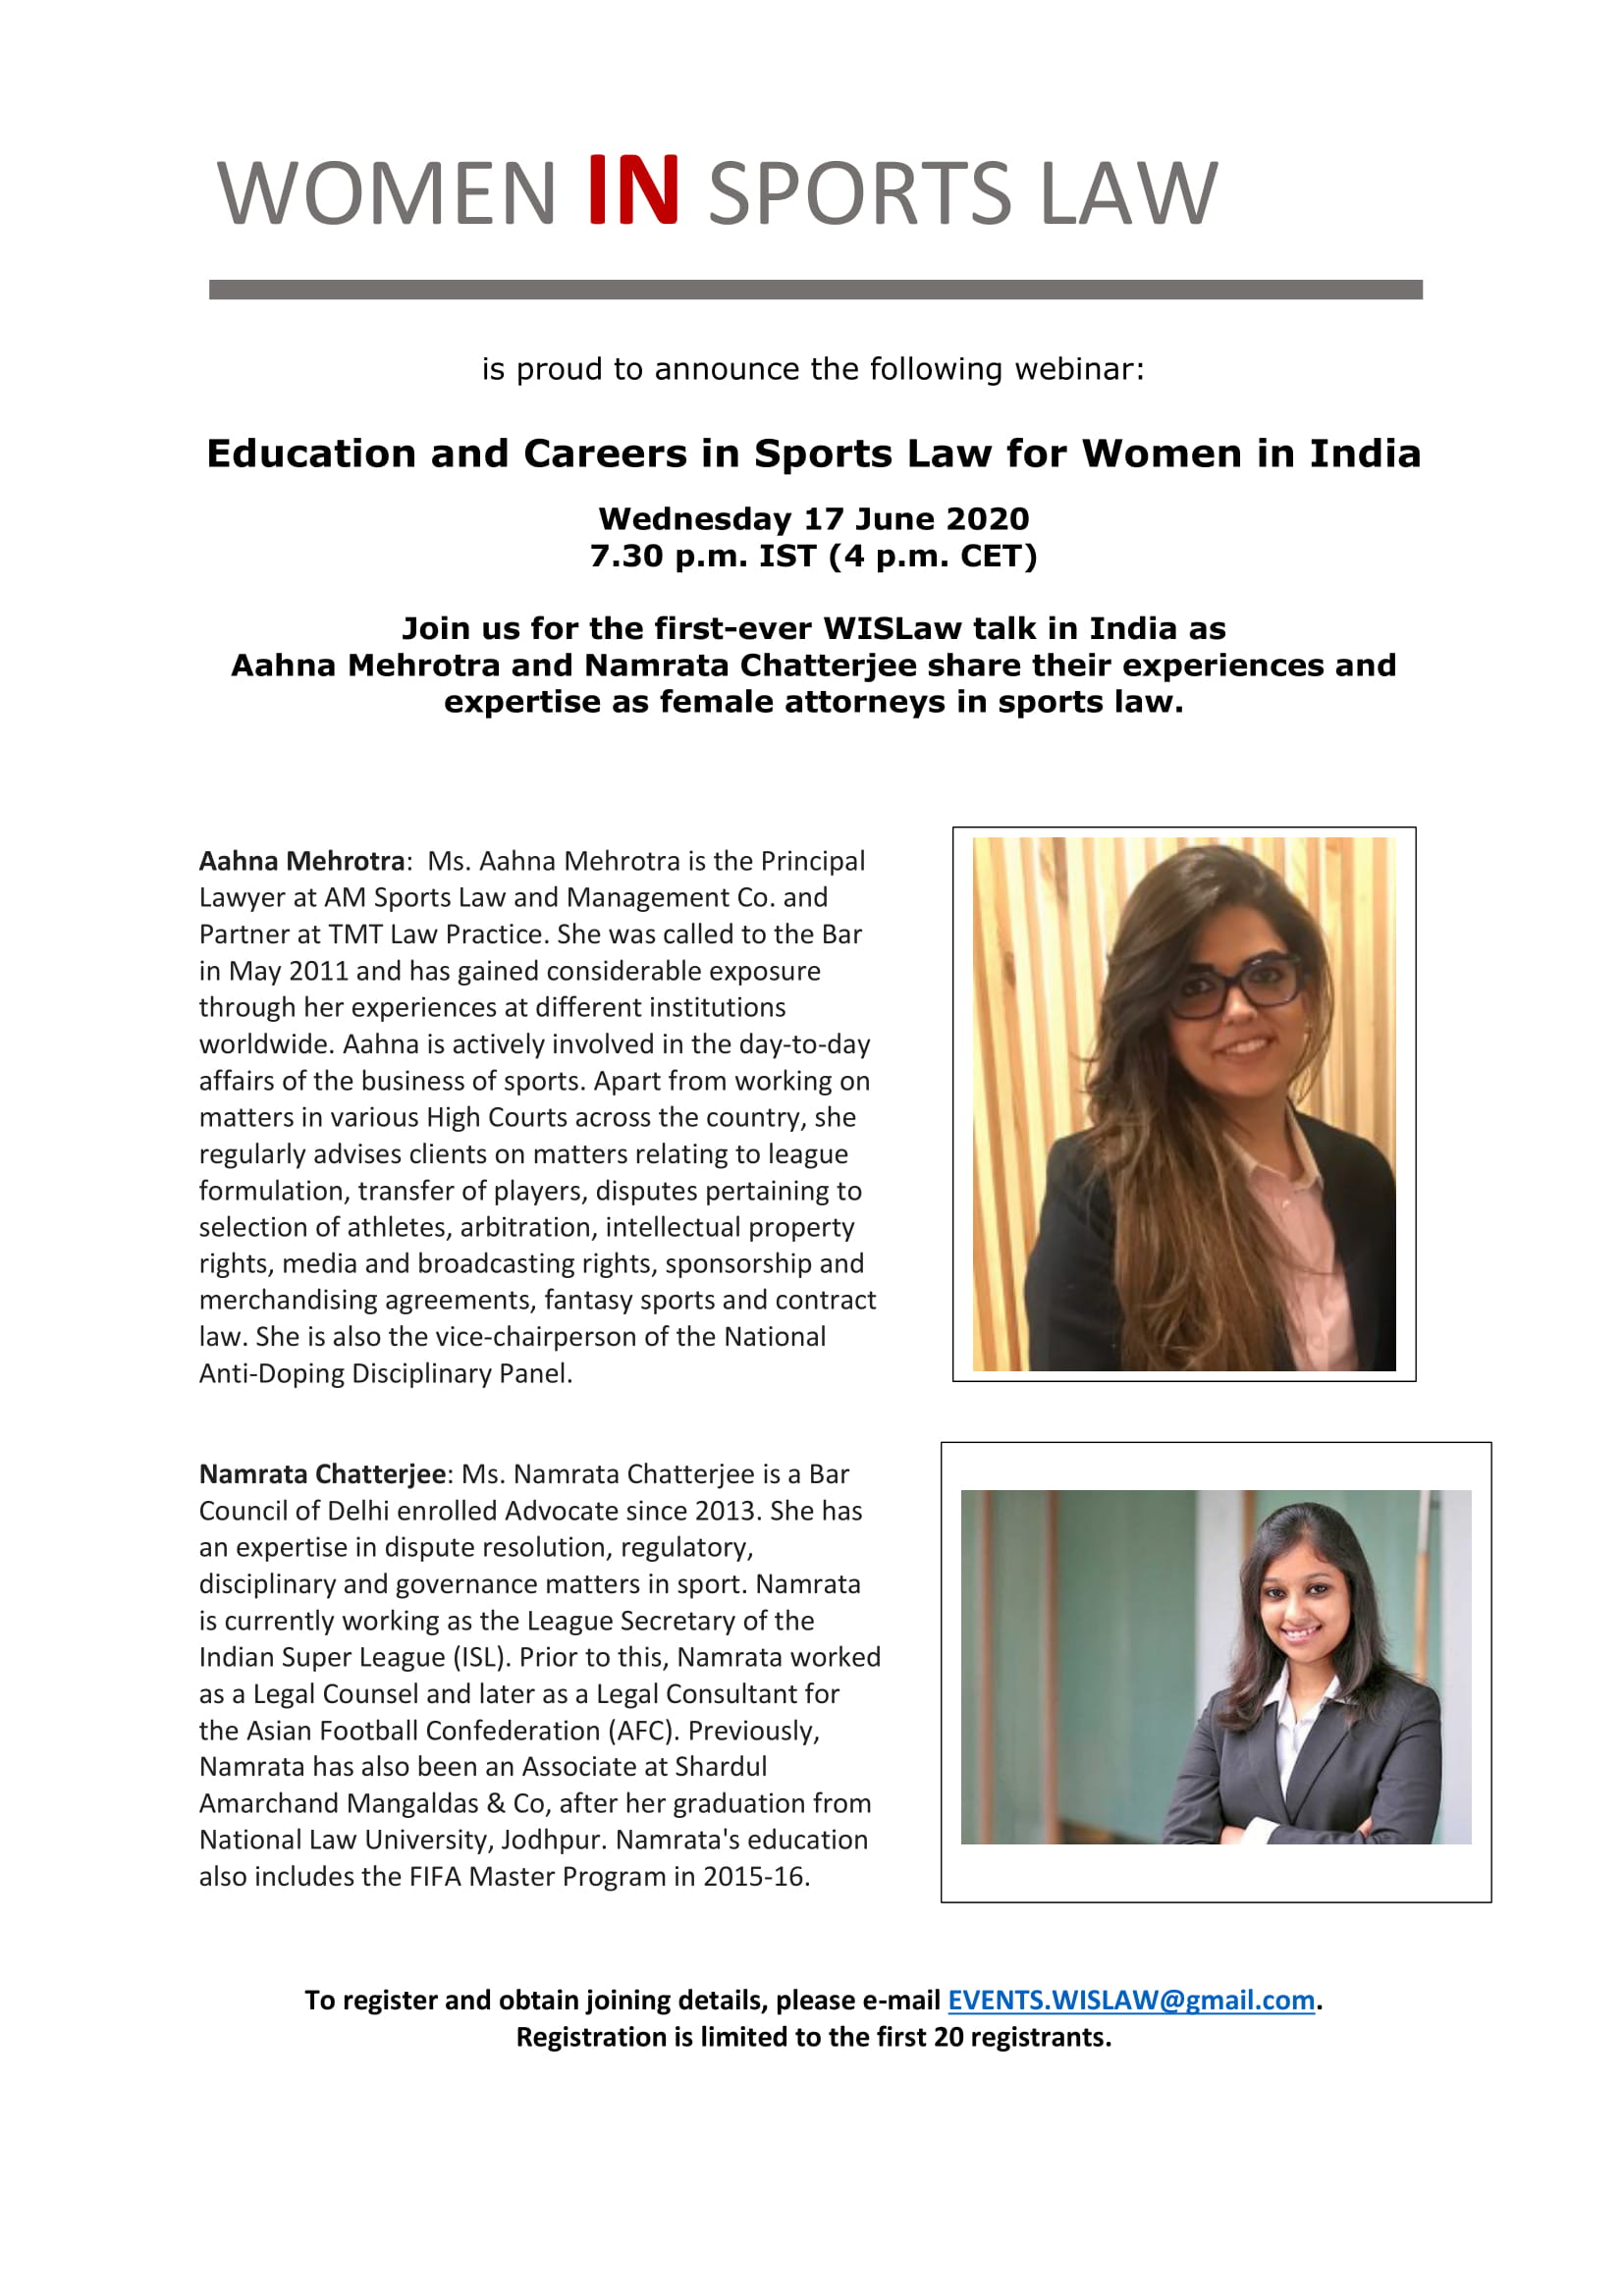 Education and Careers in Sports Law for Women in India - 17 June 2020